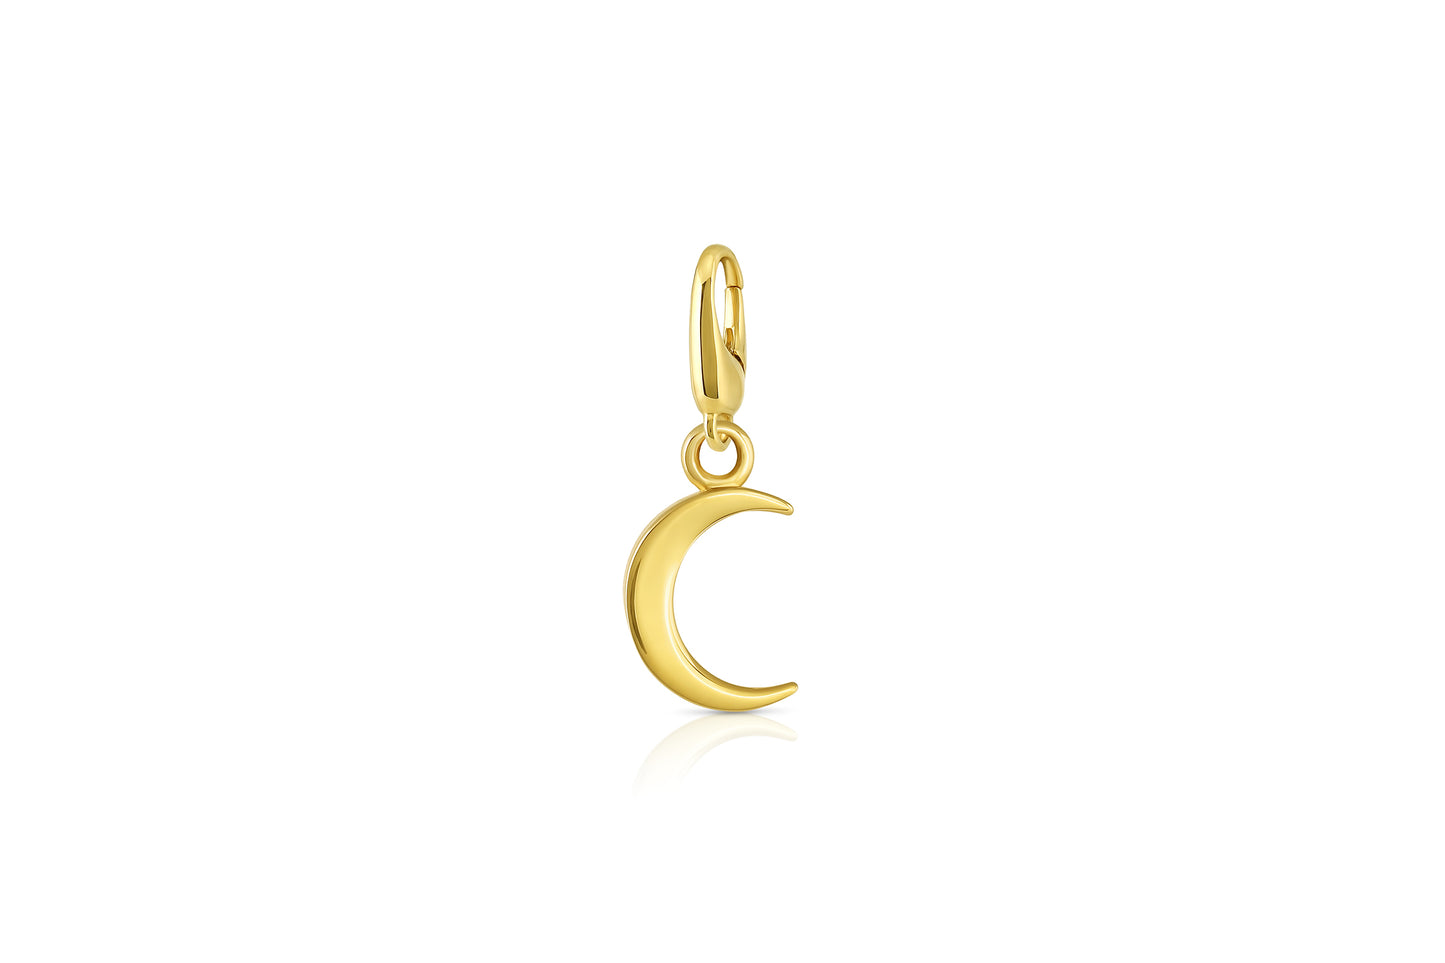 18k yellow gold crescent moon pendant with lobster clasp on white background.